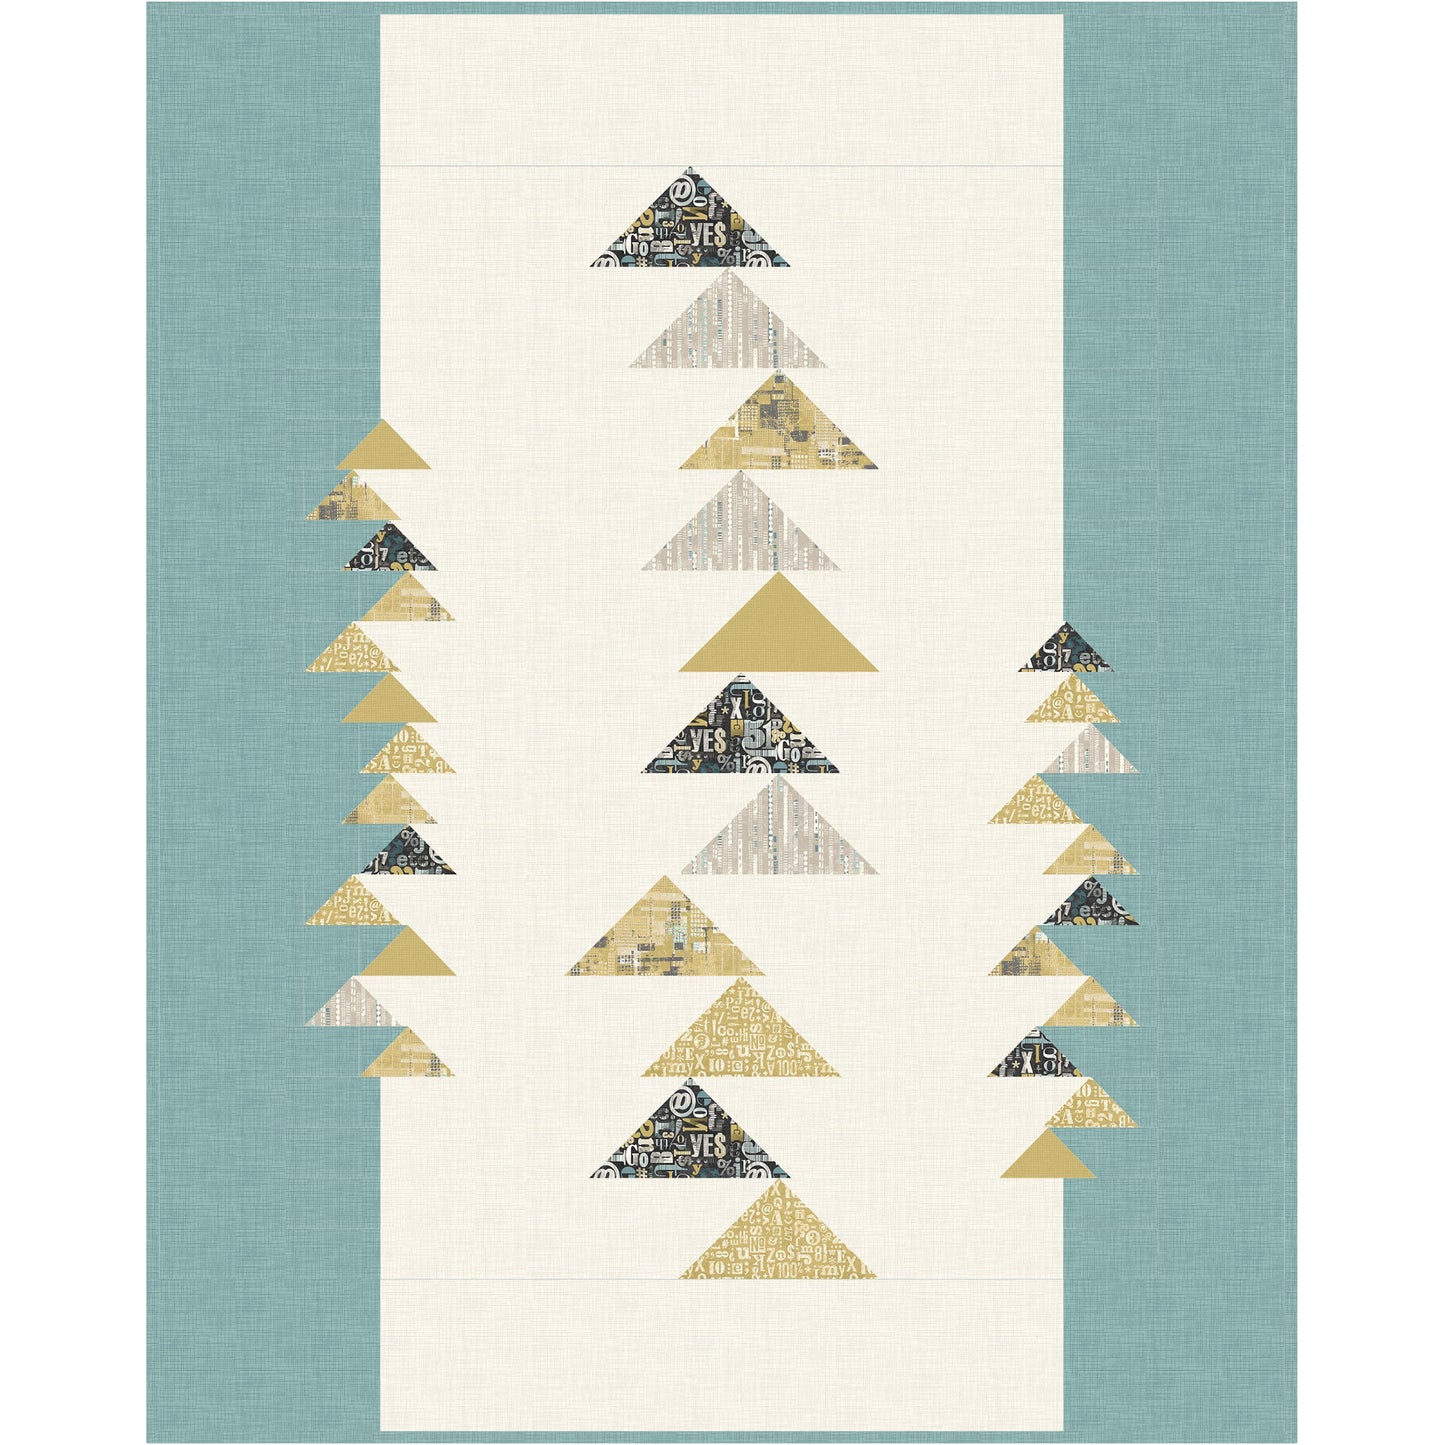 A quilt with colorful triangles with background of cream in the middle and blue on right and left.